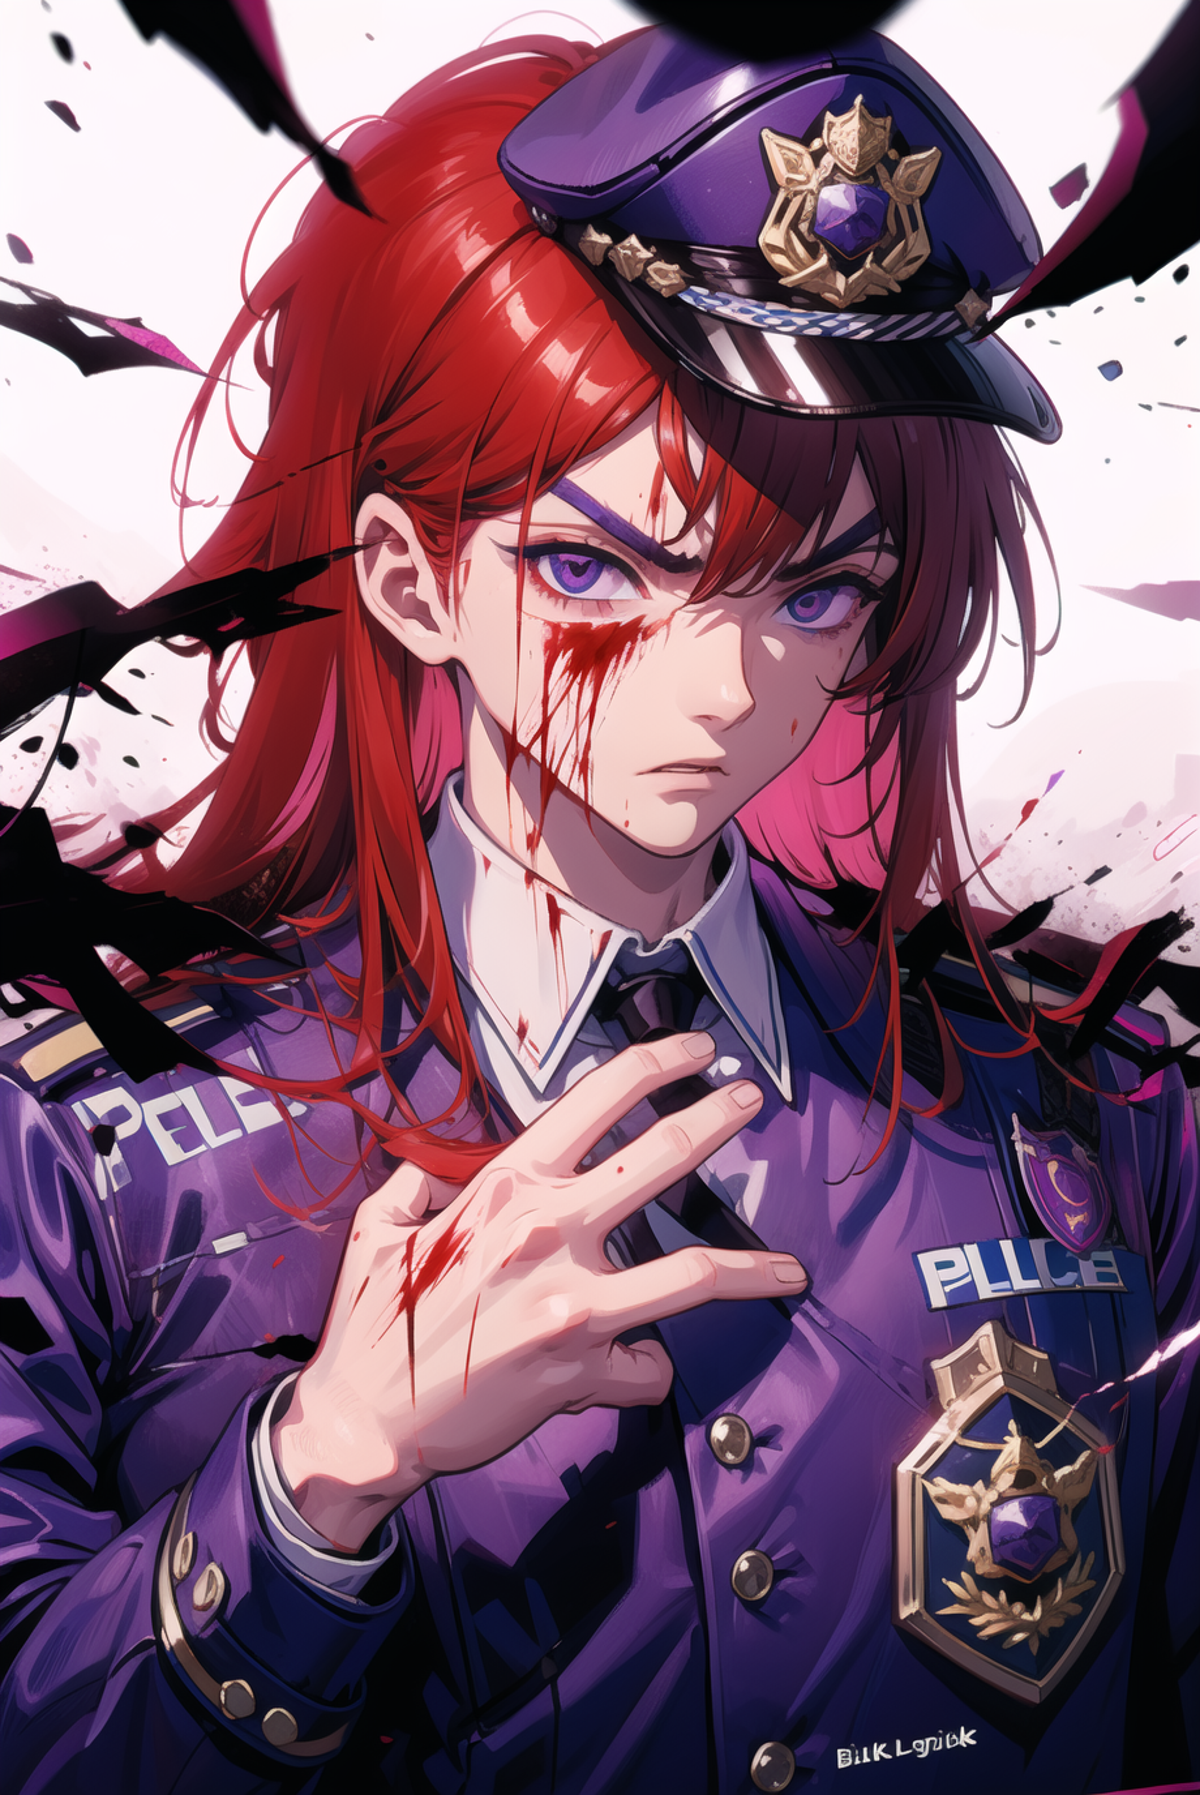 The_Man_Behind_The_Slaughter purple outfit police officer hat British , Conqueror's_Haki Red Lightning Black Lightning eye...